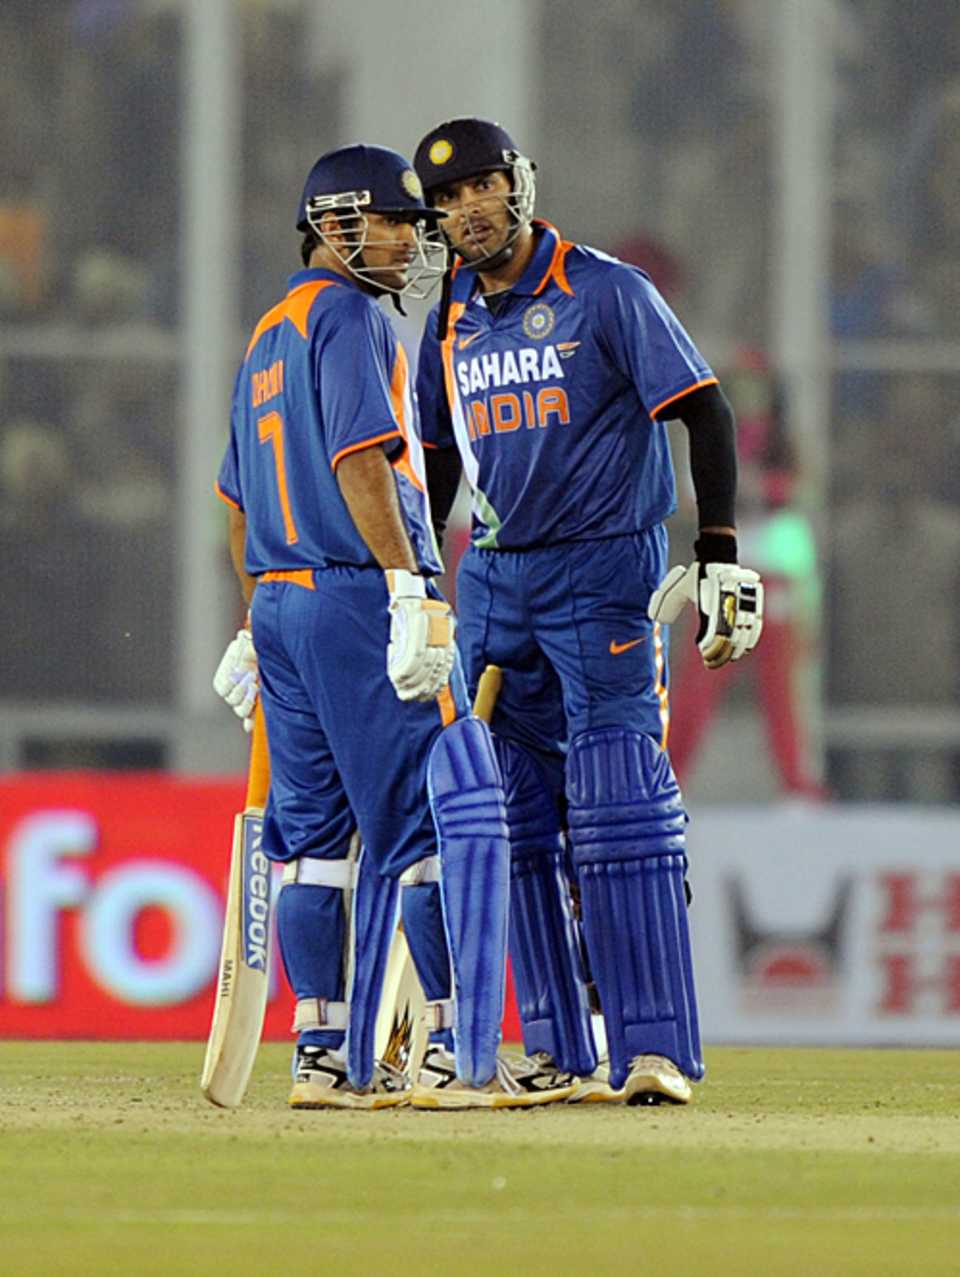 MS Dhoni and Yuvraj Singh added 80 in no time